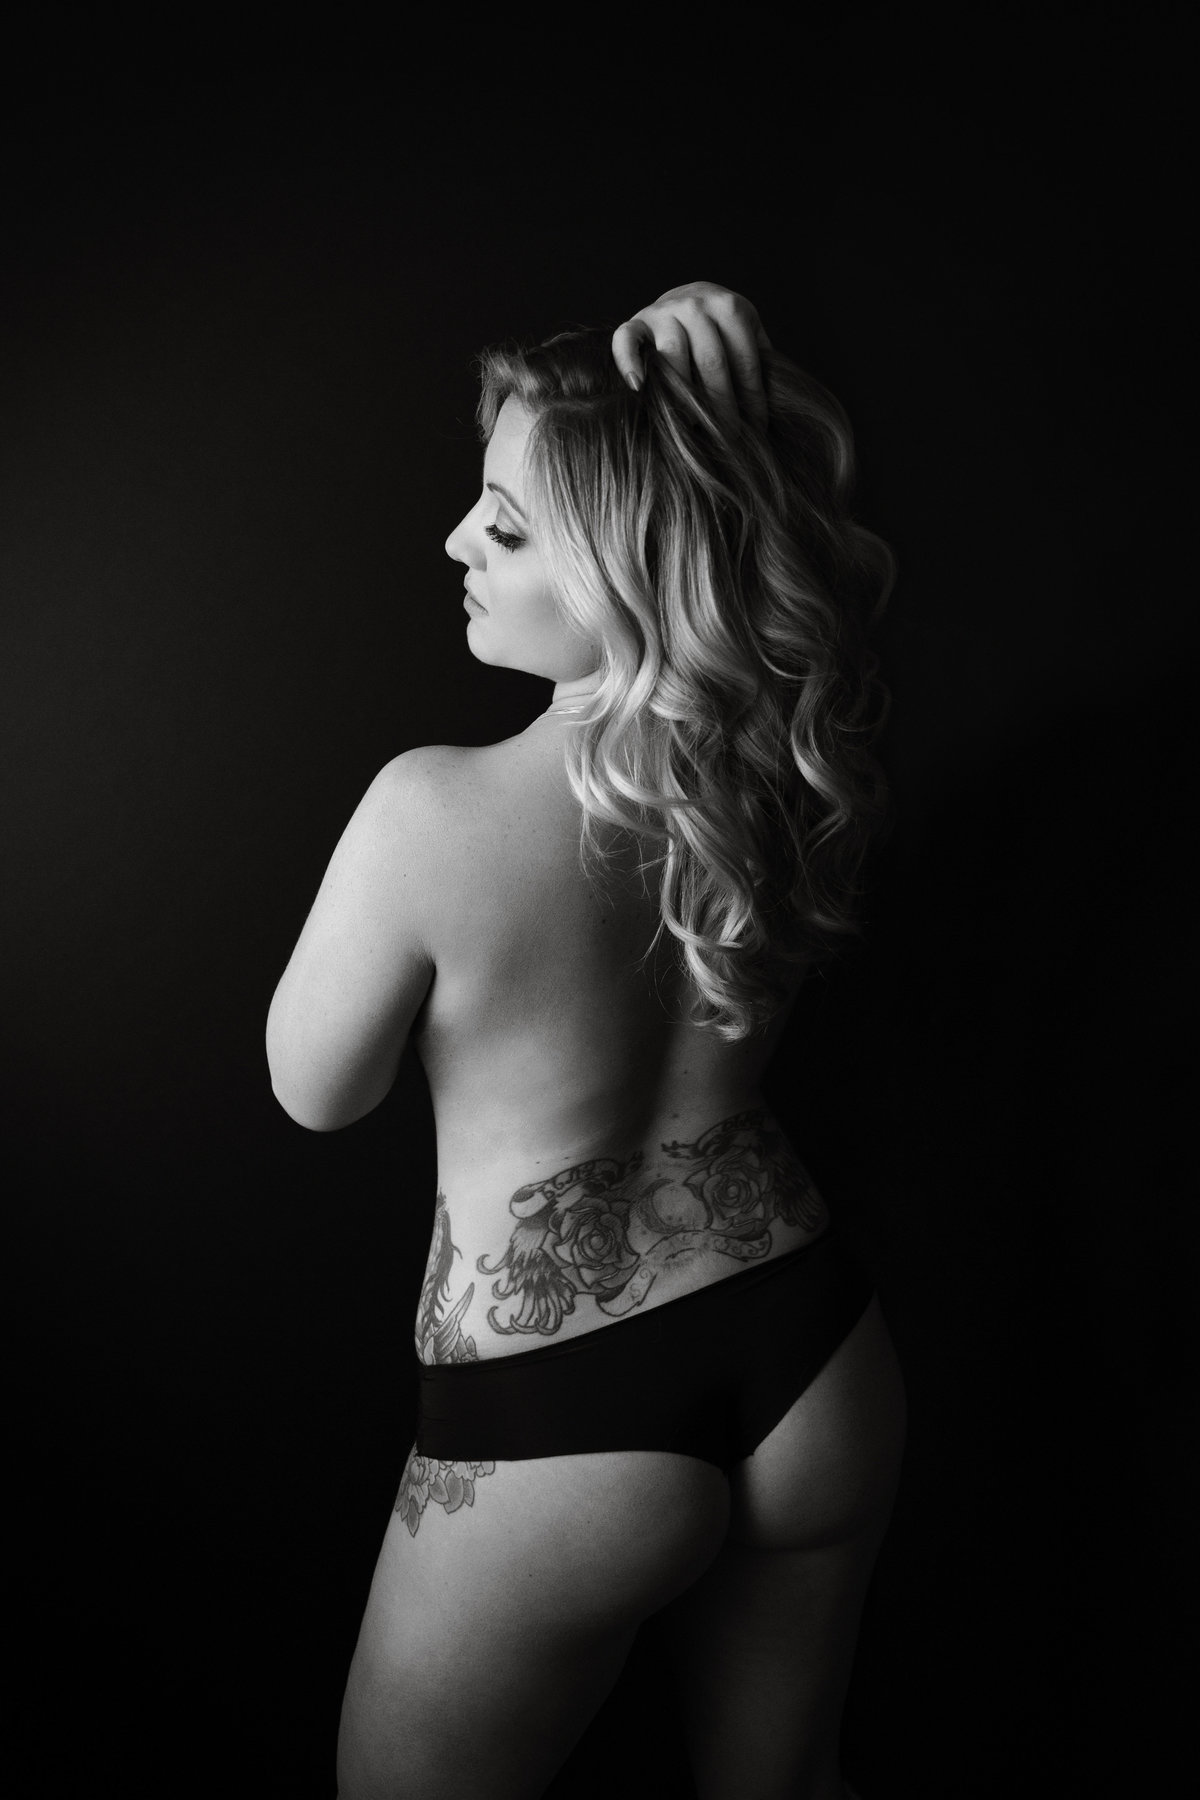 Woman poses against black background with tattoos and black underwear